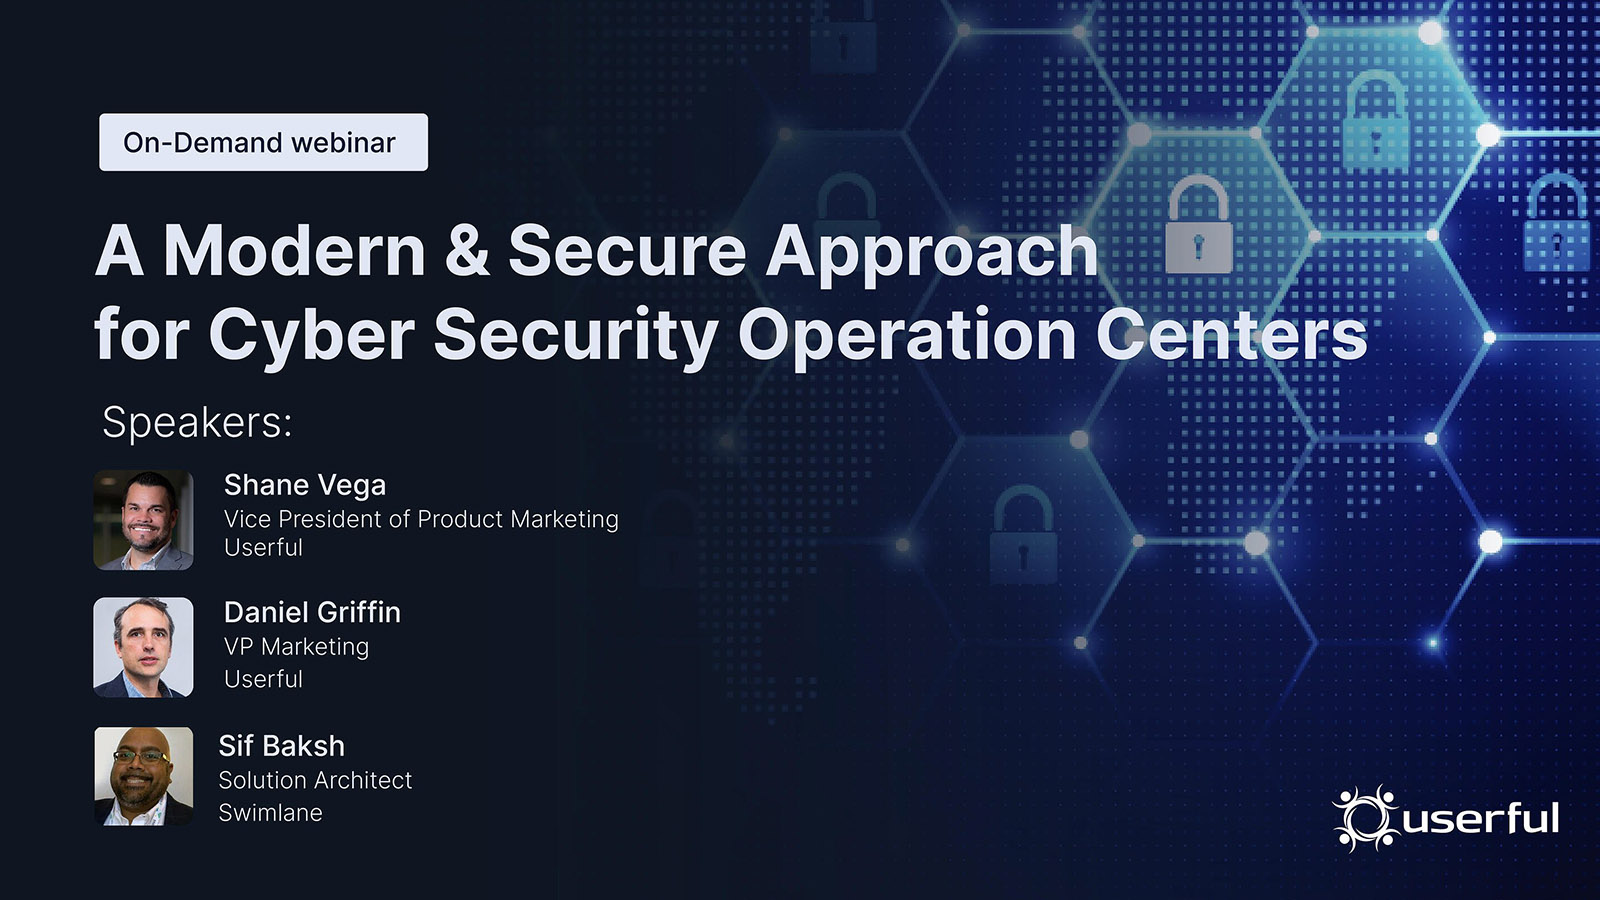 Live Webinar, Cyber Security Operation Centers: A Modern & Secure Approach for Cyber Security Operation Centers, July 27, 9am PST